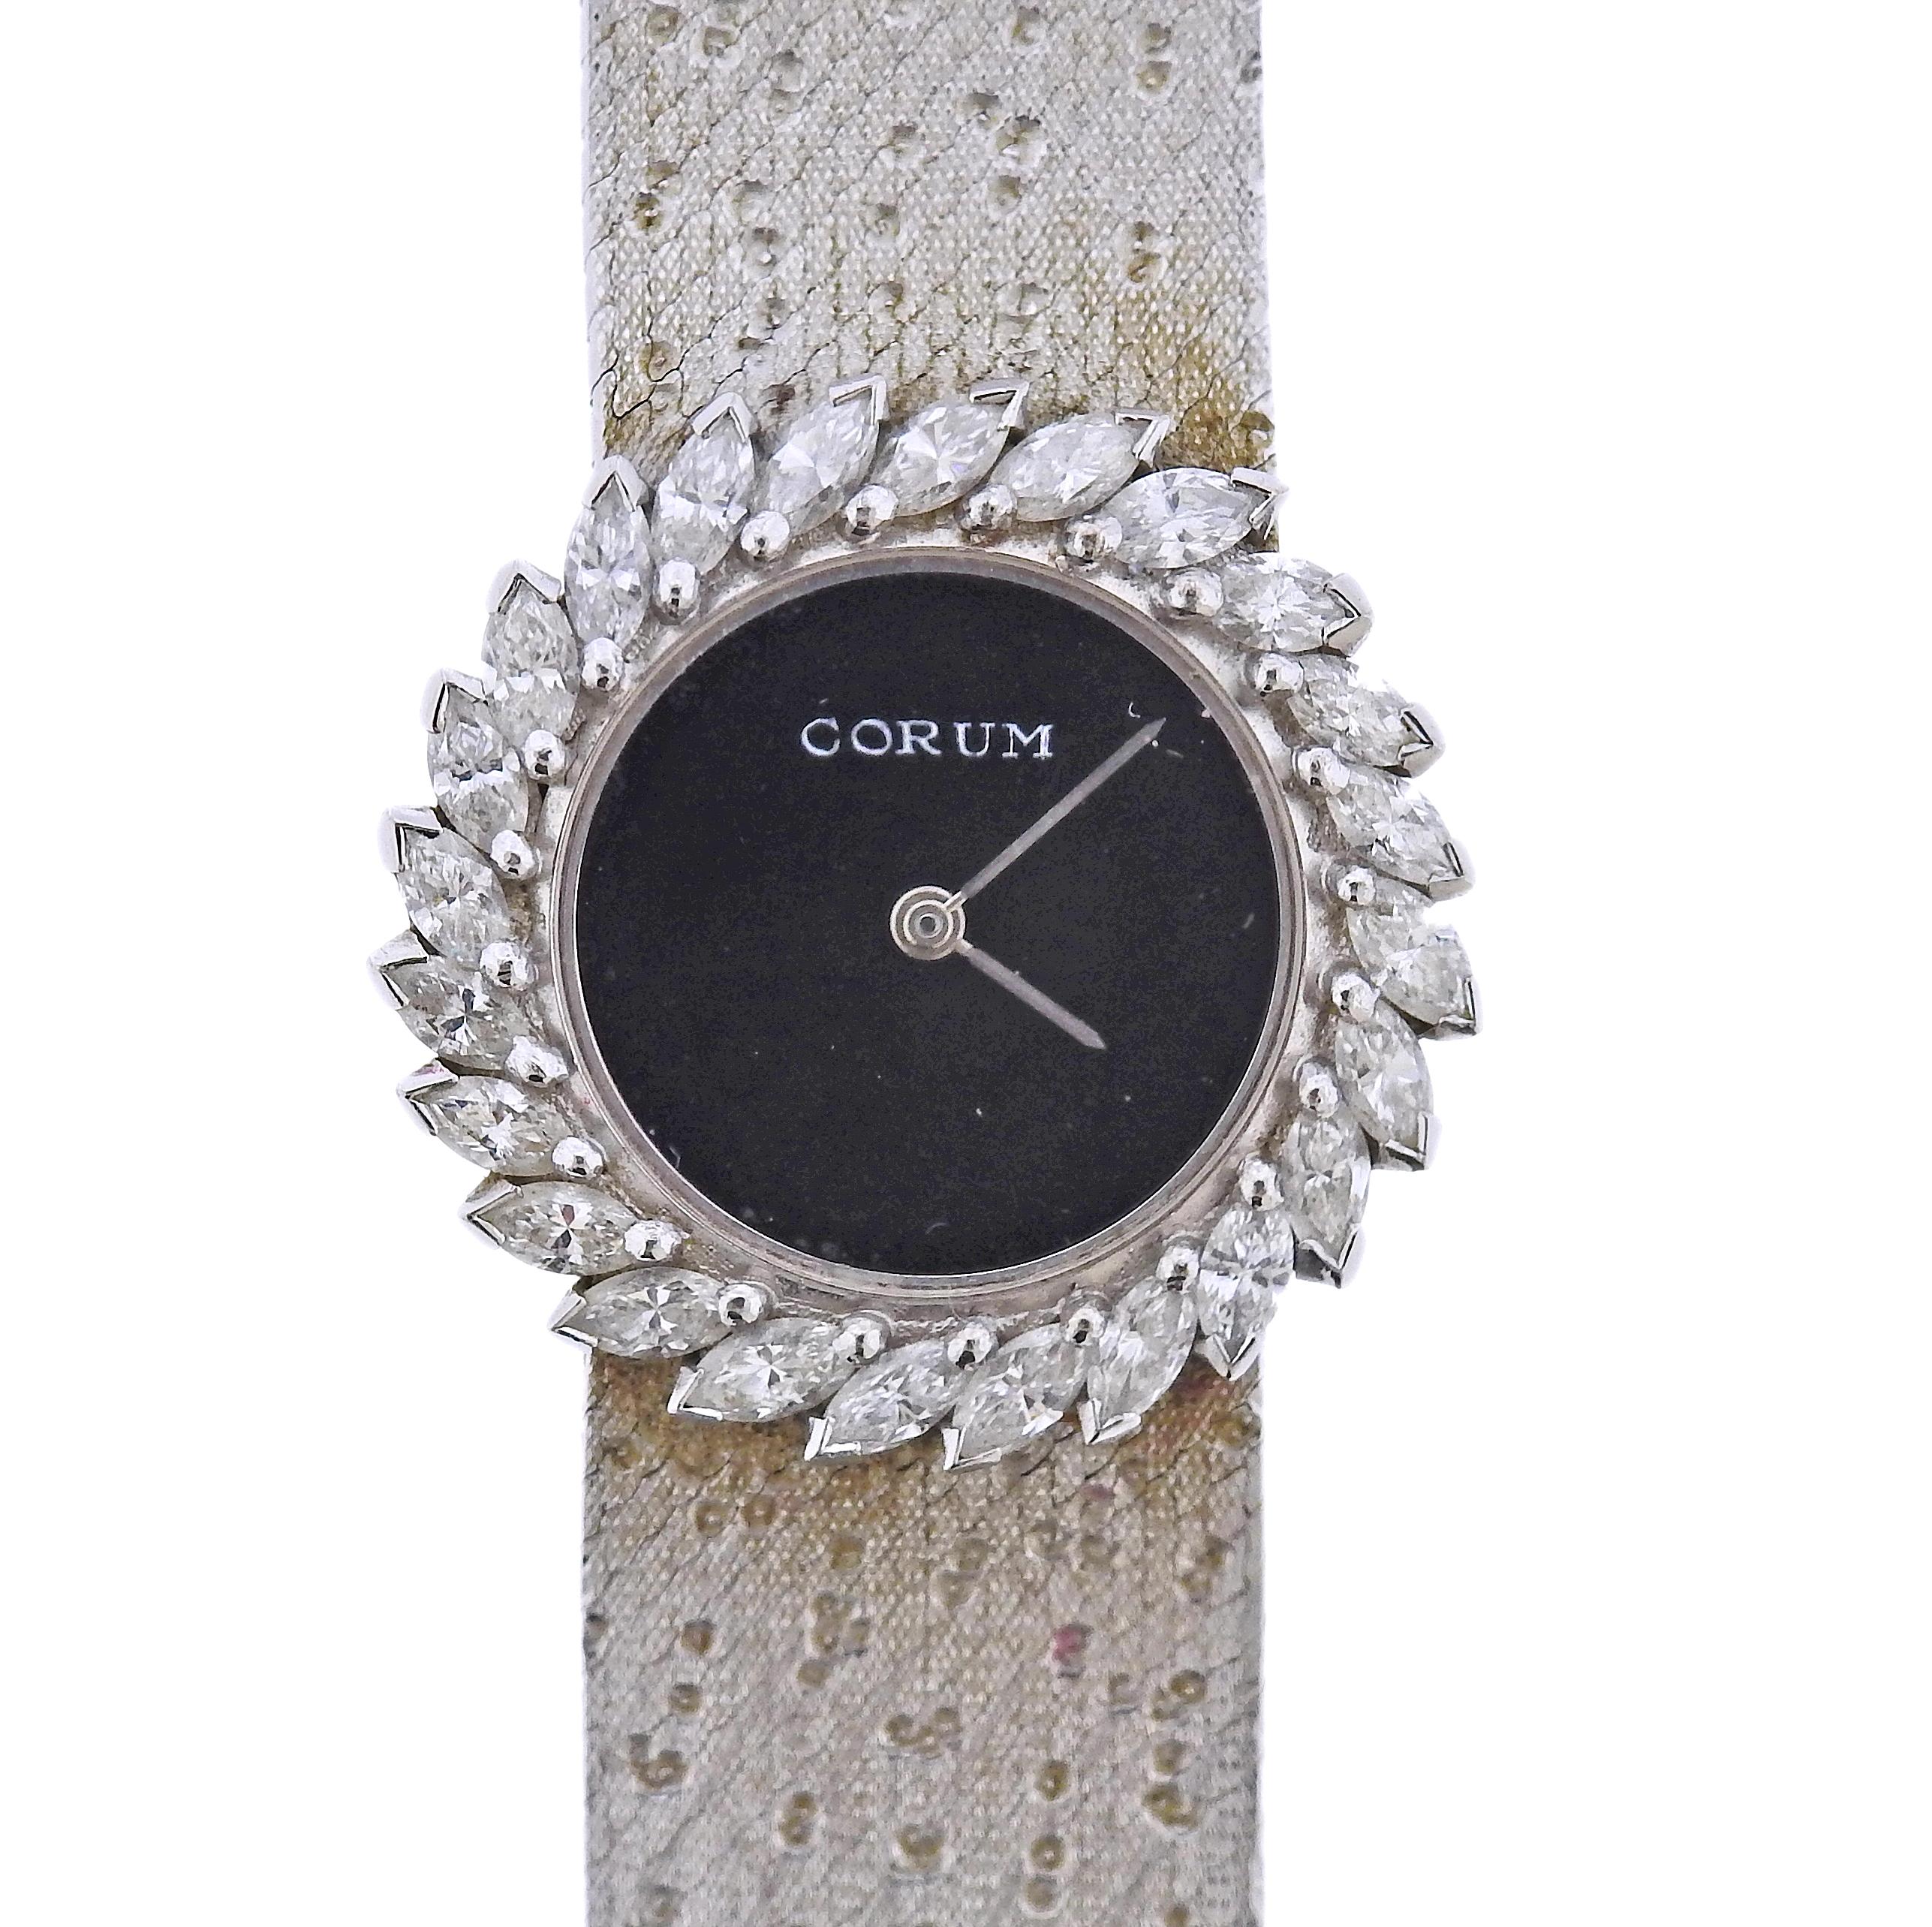 Classic Corum 18k white gold watch, with black Corum dial, case decorated with approx. 2.40ctw in diamonds. Case - 28mm in diameter. Bracelet is 7